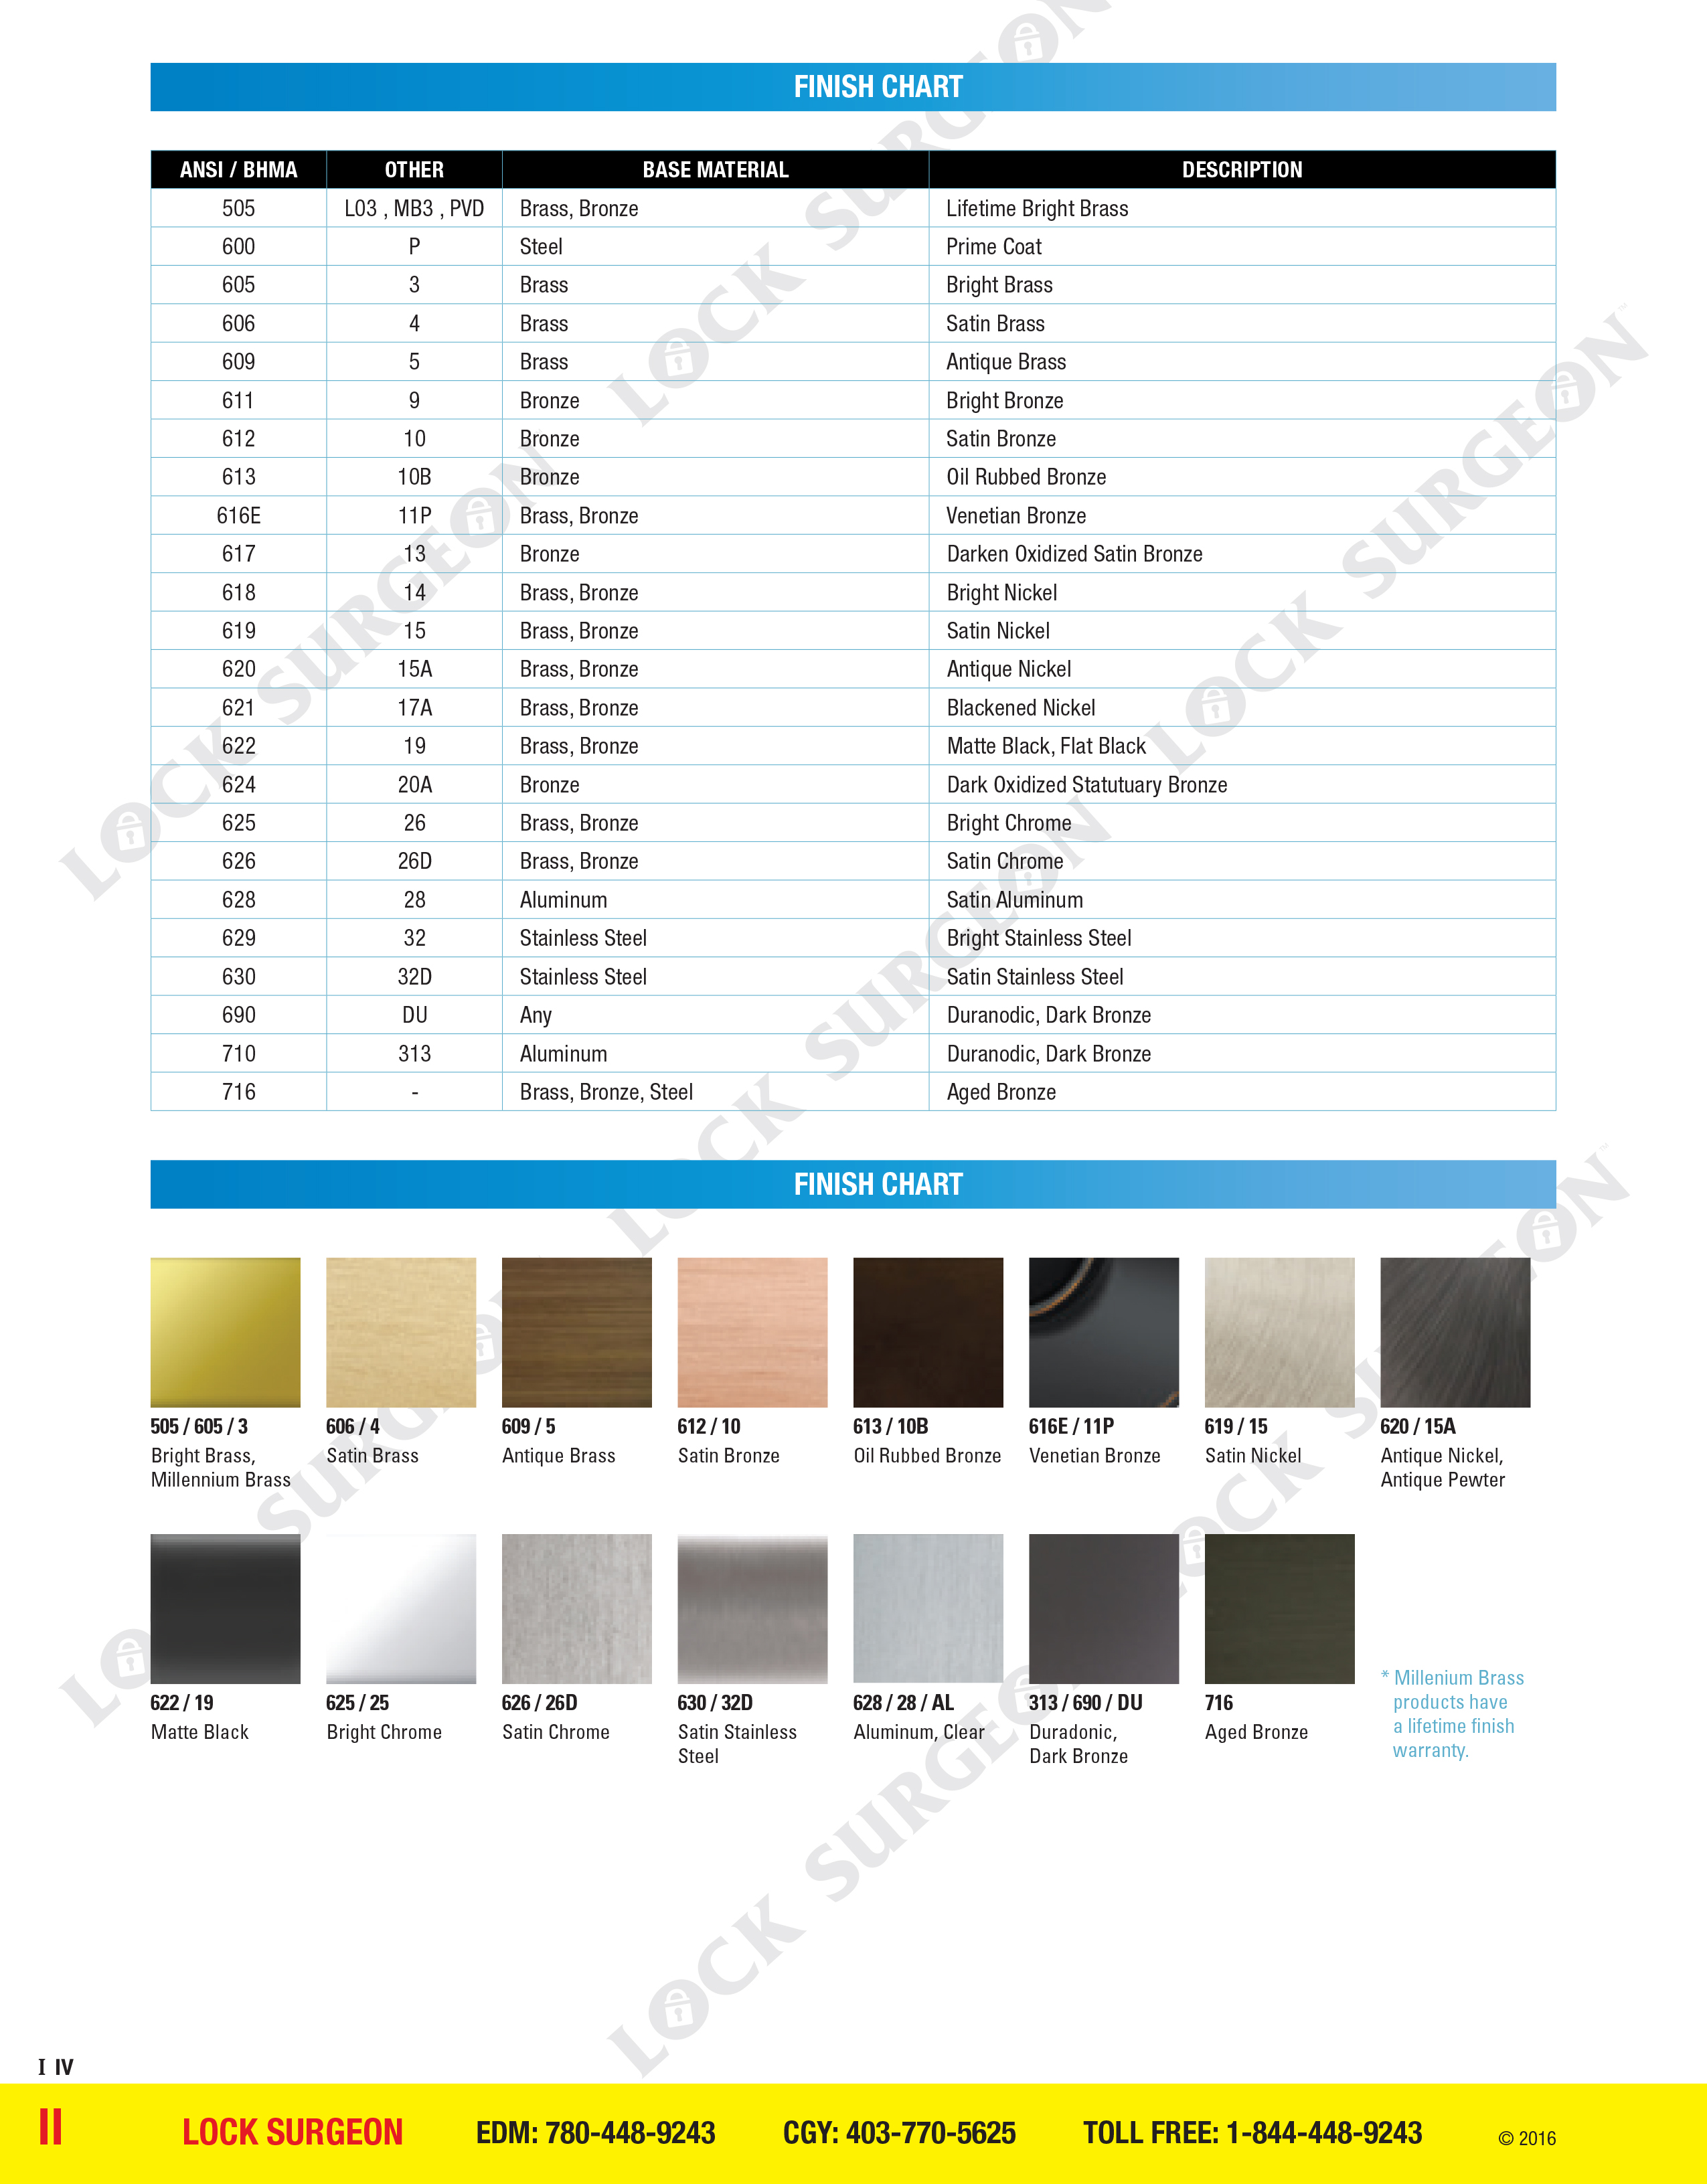 Reference chart displays for product finishes.